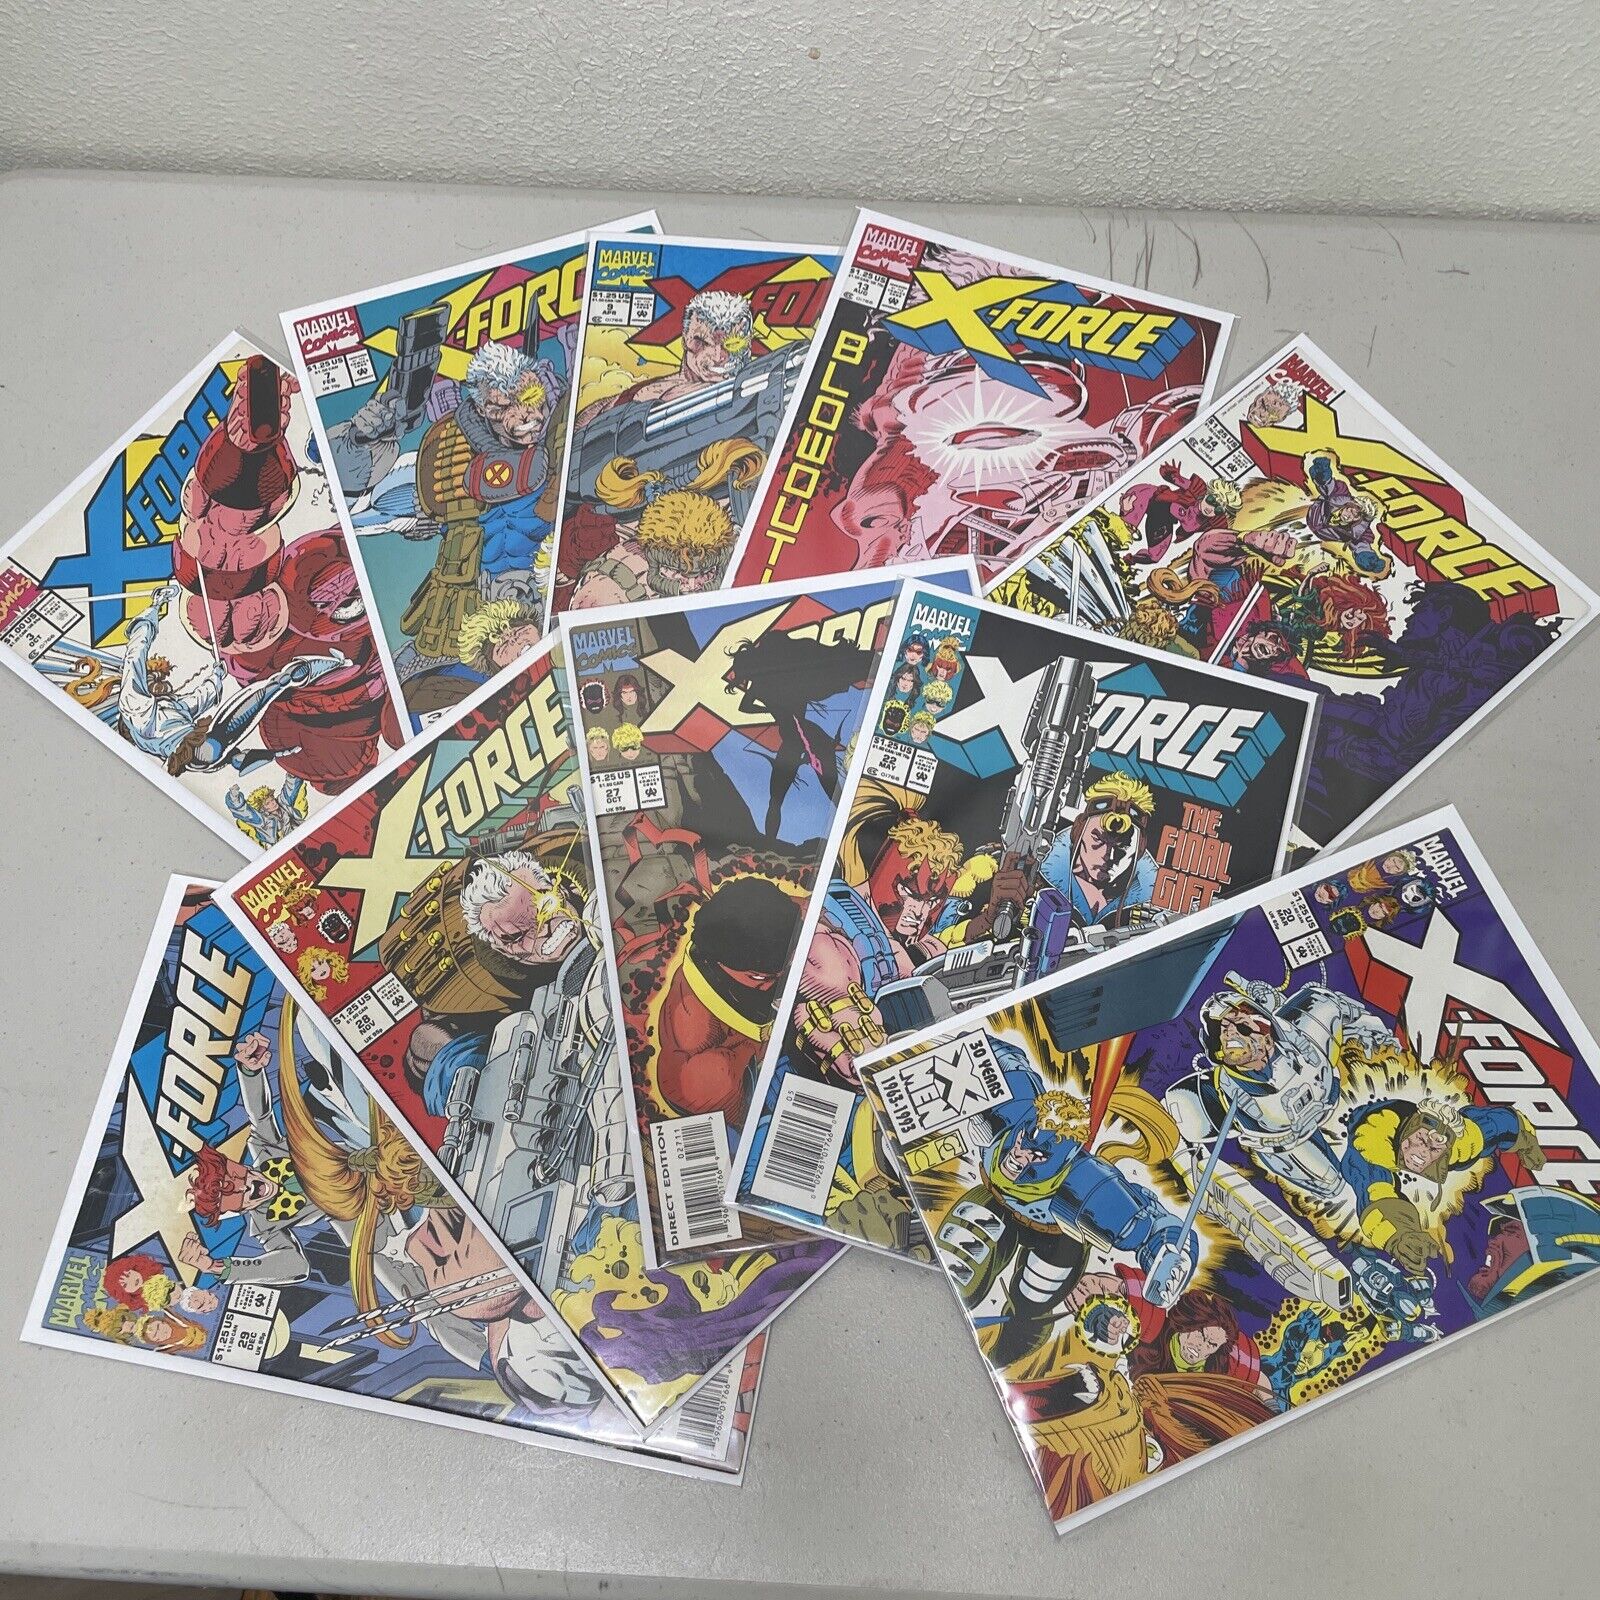 Mixed Lot of 10 X-Force - Copper to Modern Age Marvel Comic Books 